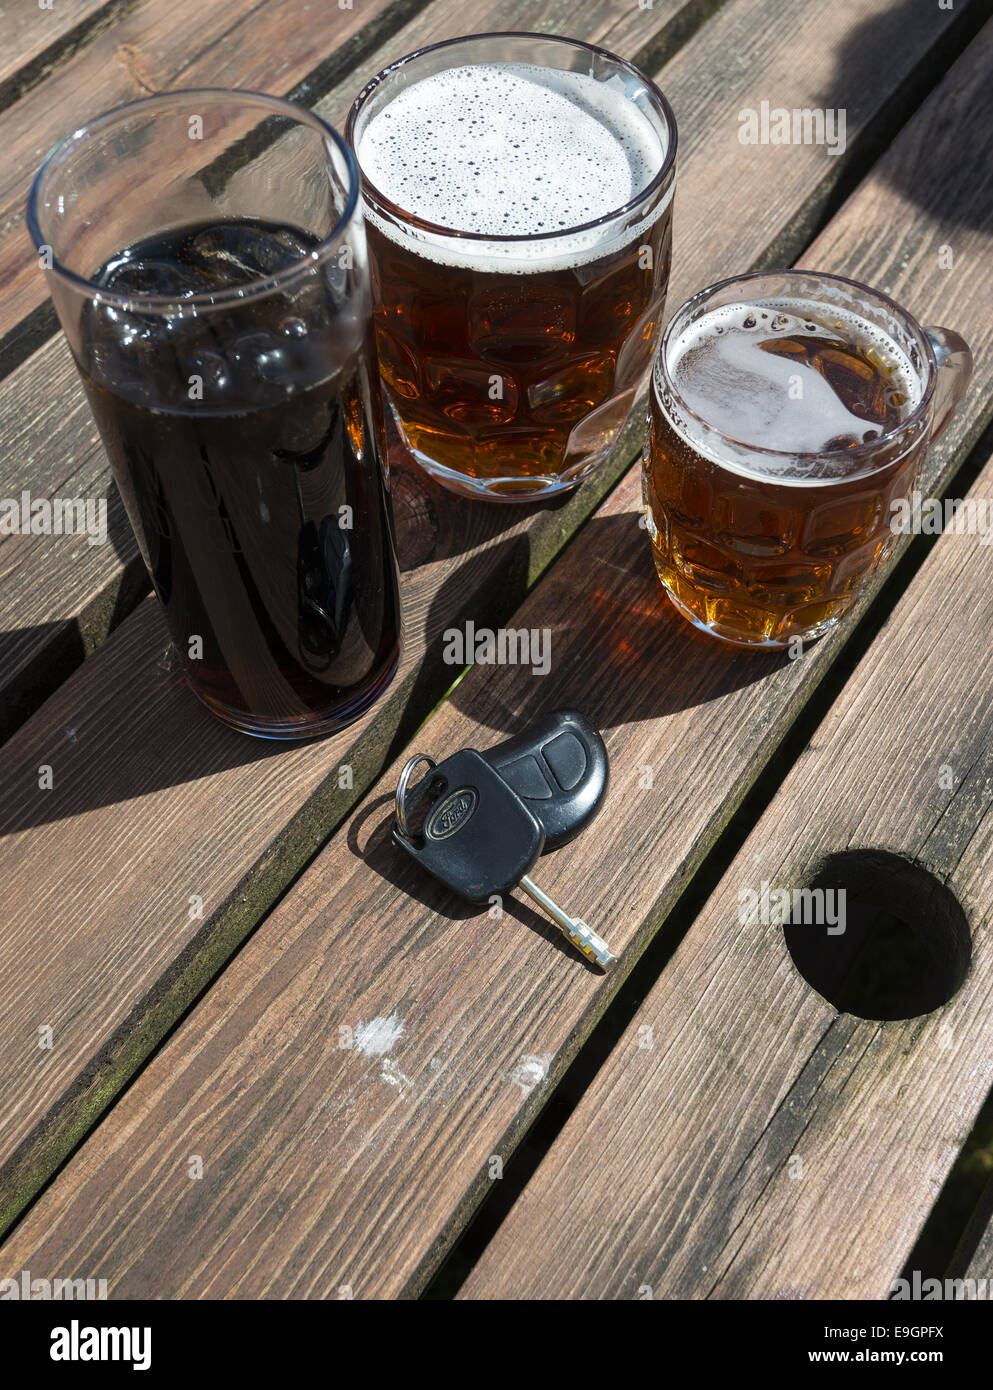 Car keys with a soft drink and pints of beer on a wooden beer garden table Stock Photo